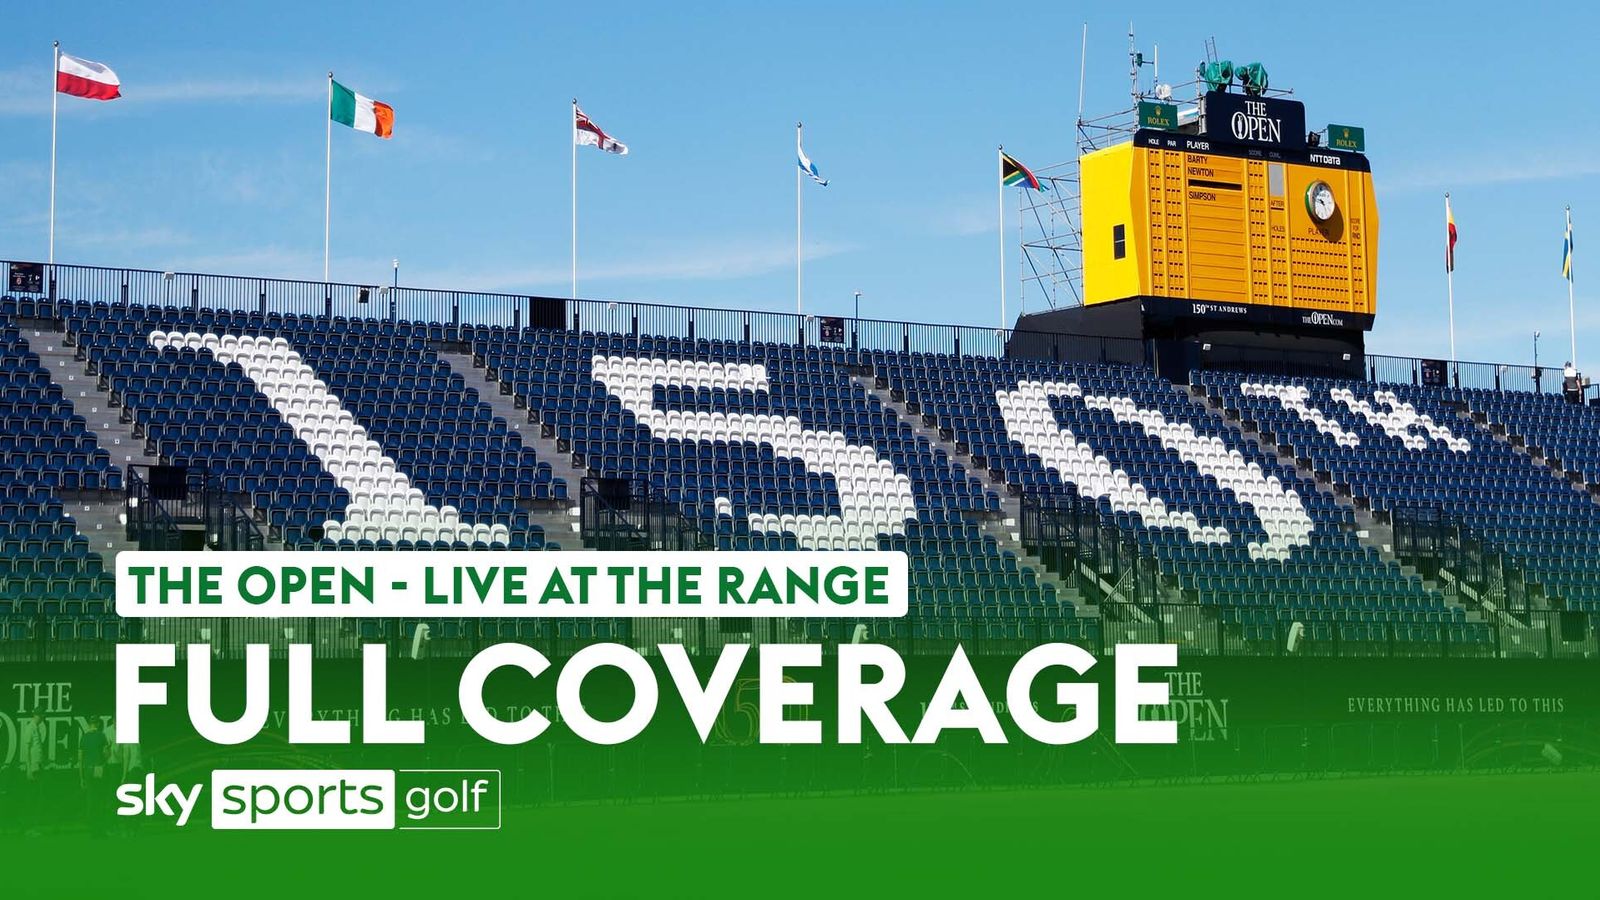 The 150th Open: Watch ‘Live At The Range’ stream from iconic Old Course at St Andrews